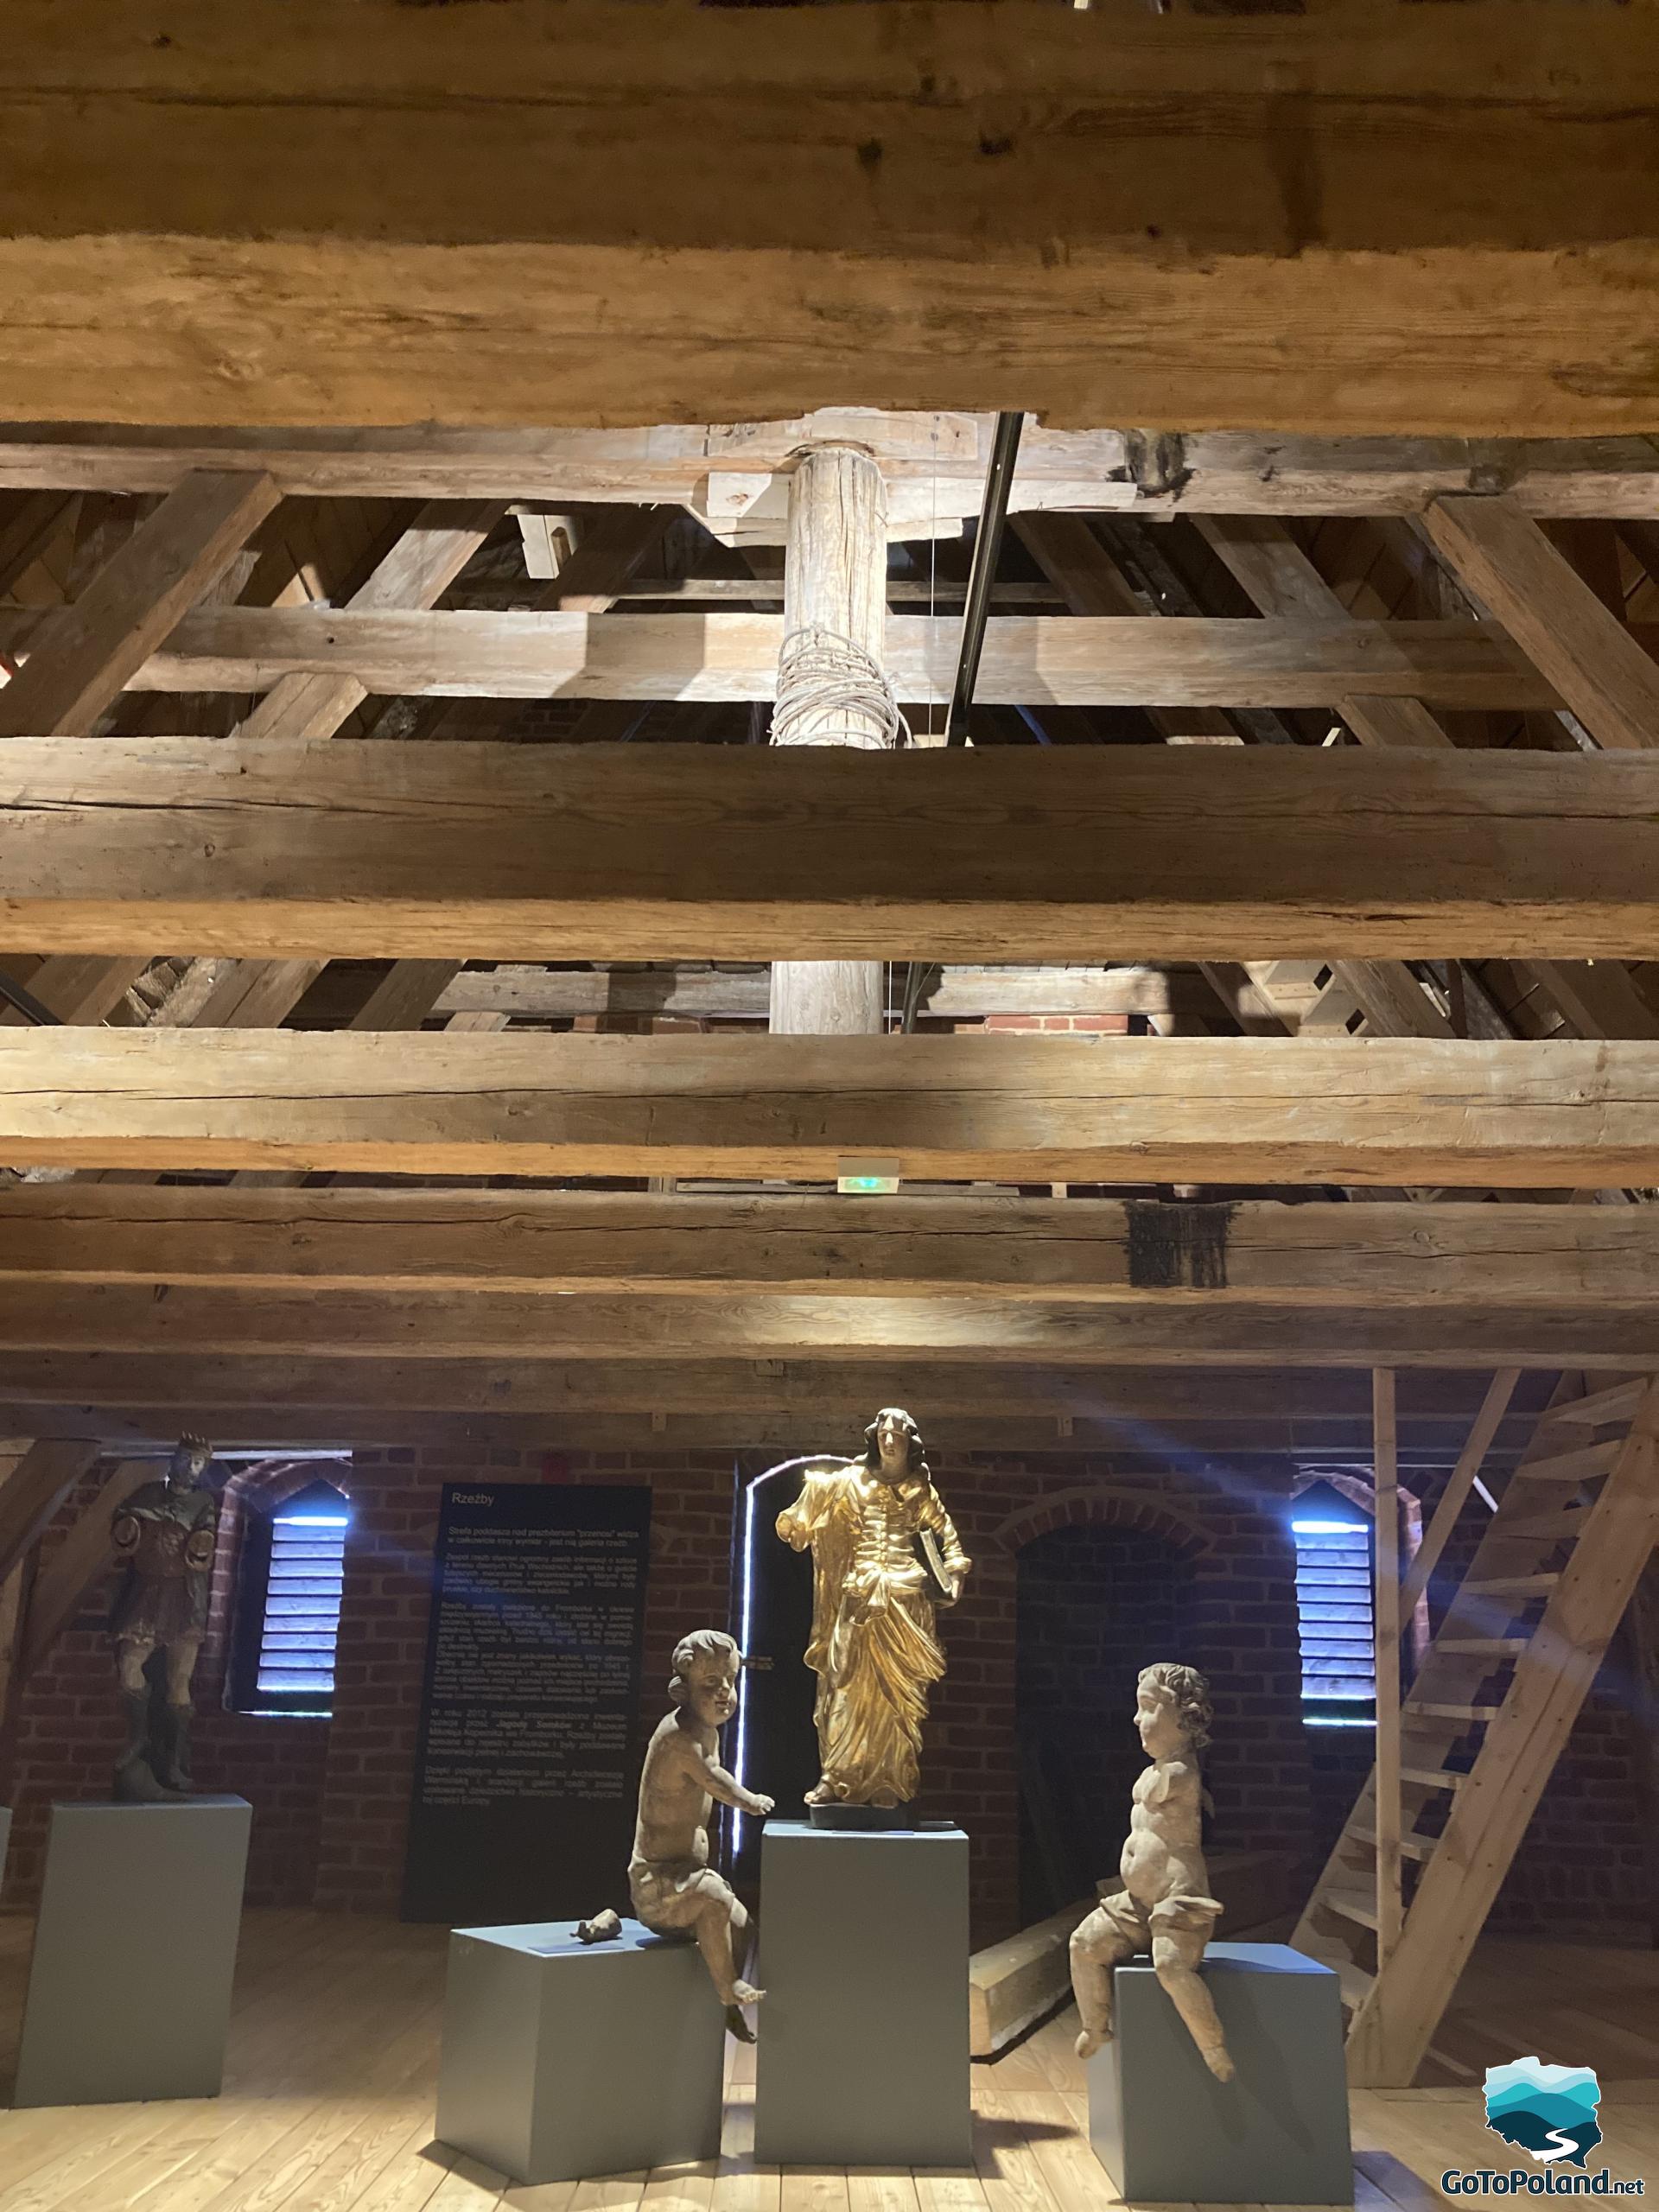 three sculptures of saints in the attic of the cathedral